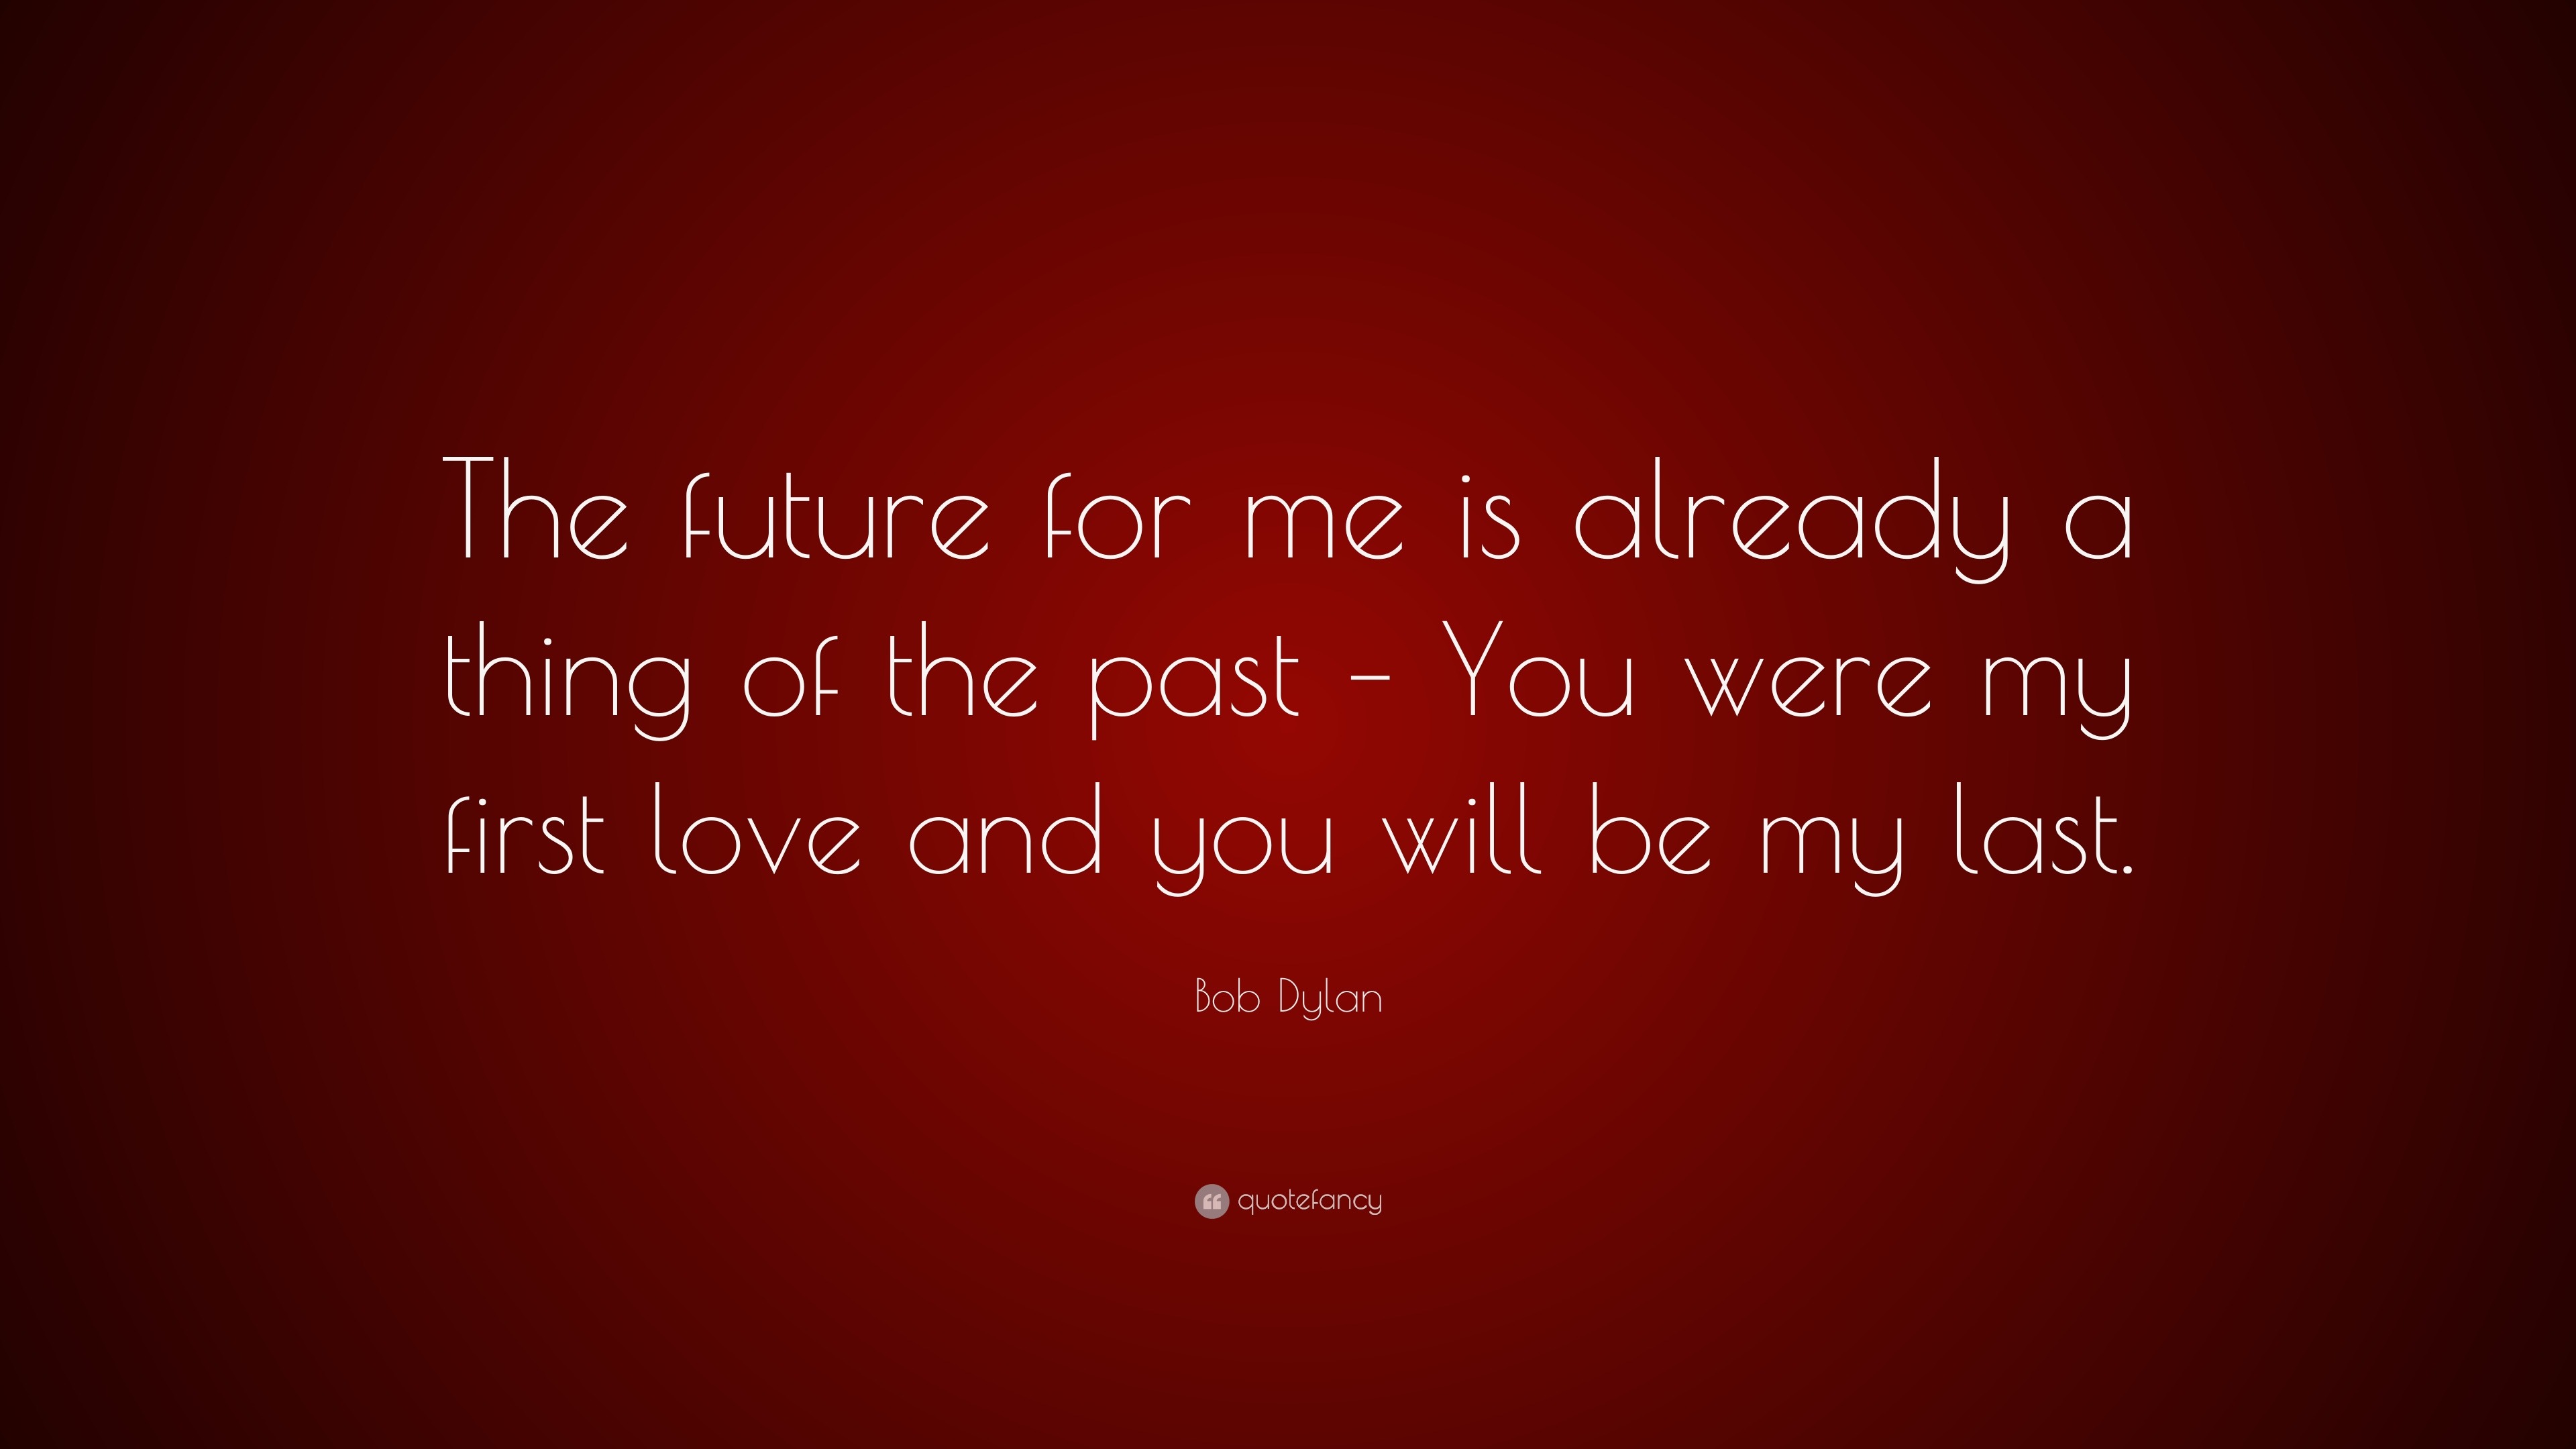 Bob Dylan Quote “The future for me is already a thing of the past